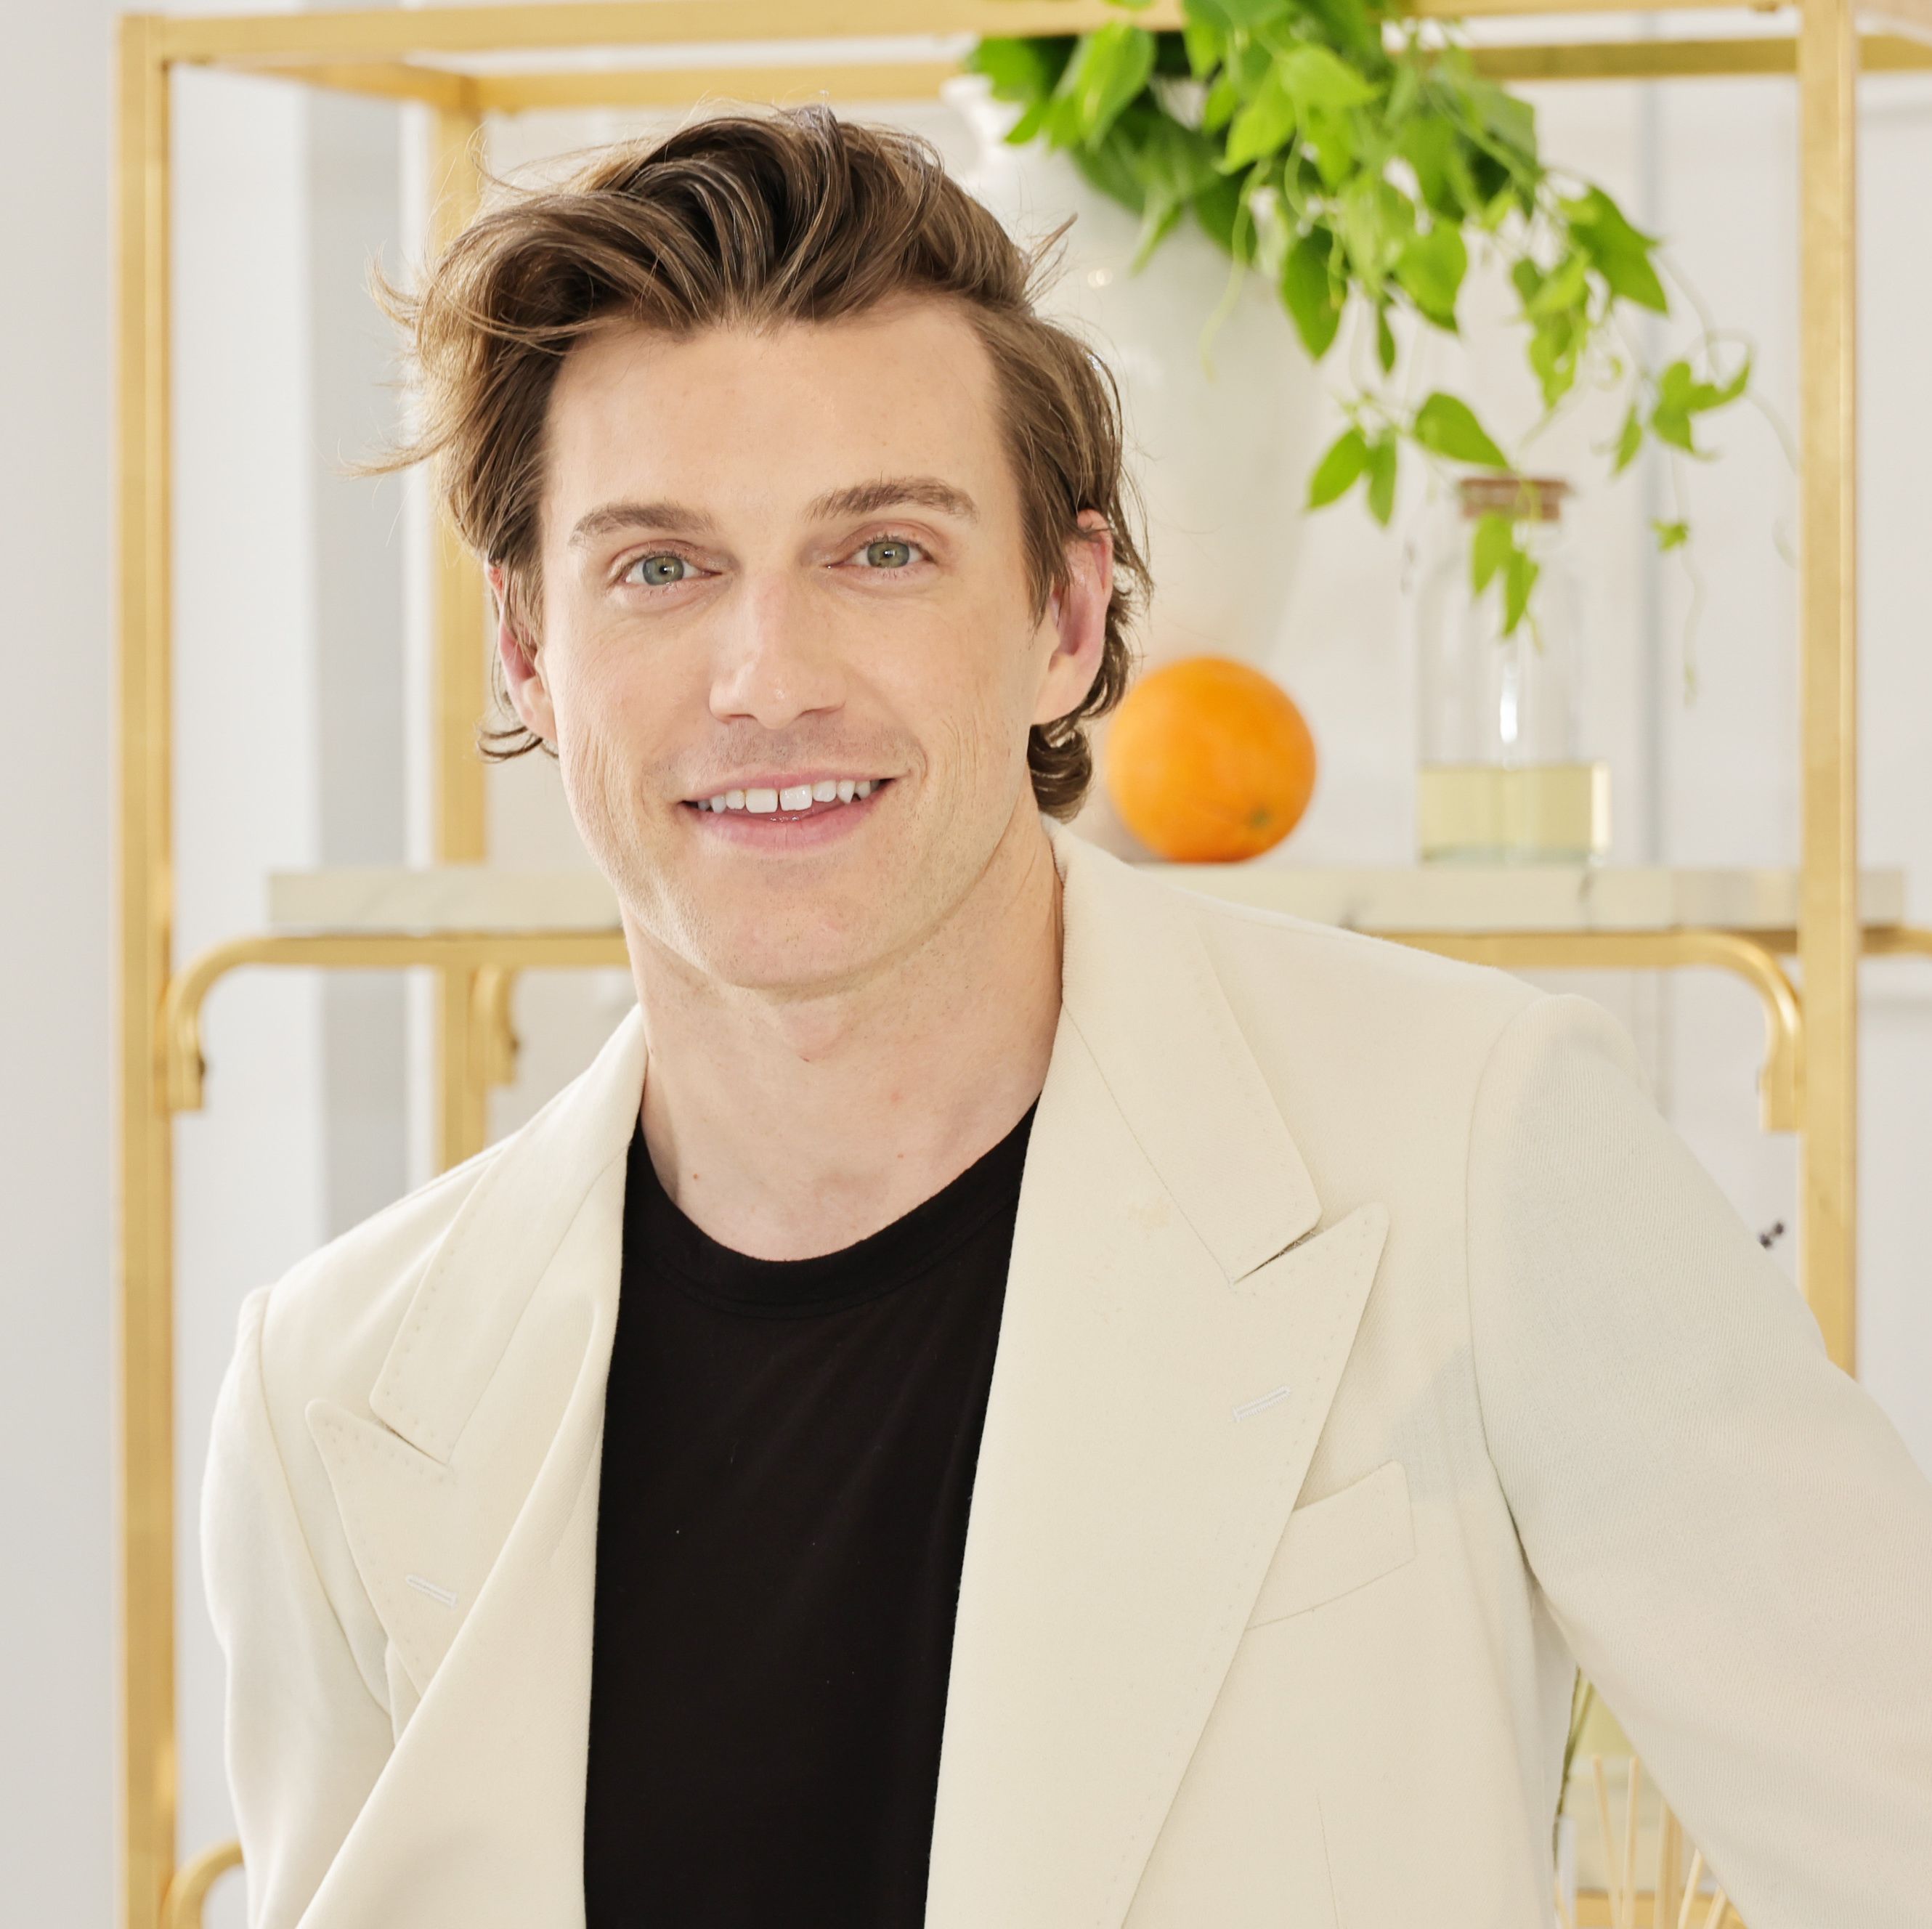 Everything You Need to Know About ‘Queer Eye’ Season 9 Newcomer Jeremiah Brent